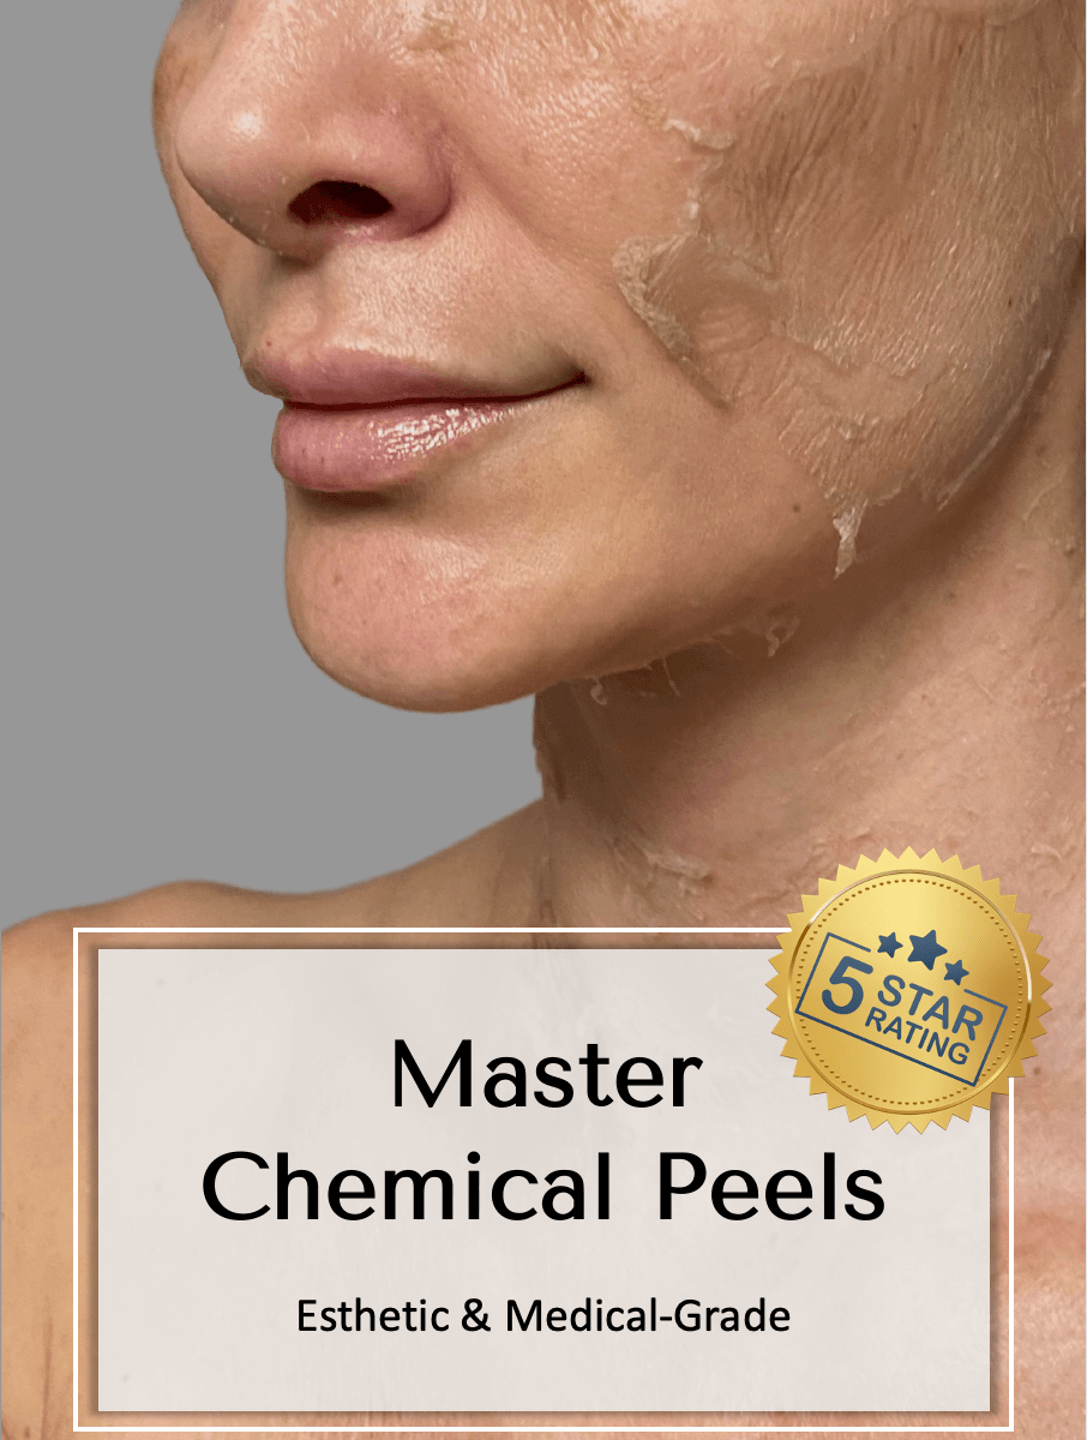 Skin peeling on lower face from a Chemical Peel Course. Chemical Peel treatment. TCA Peel Online Training Course Cover titled "Master Chemical Peels" Both Esthetic & Medical Grade Peels with 5-star review logo